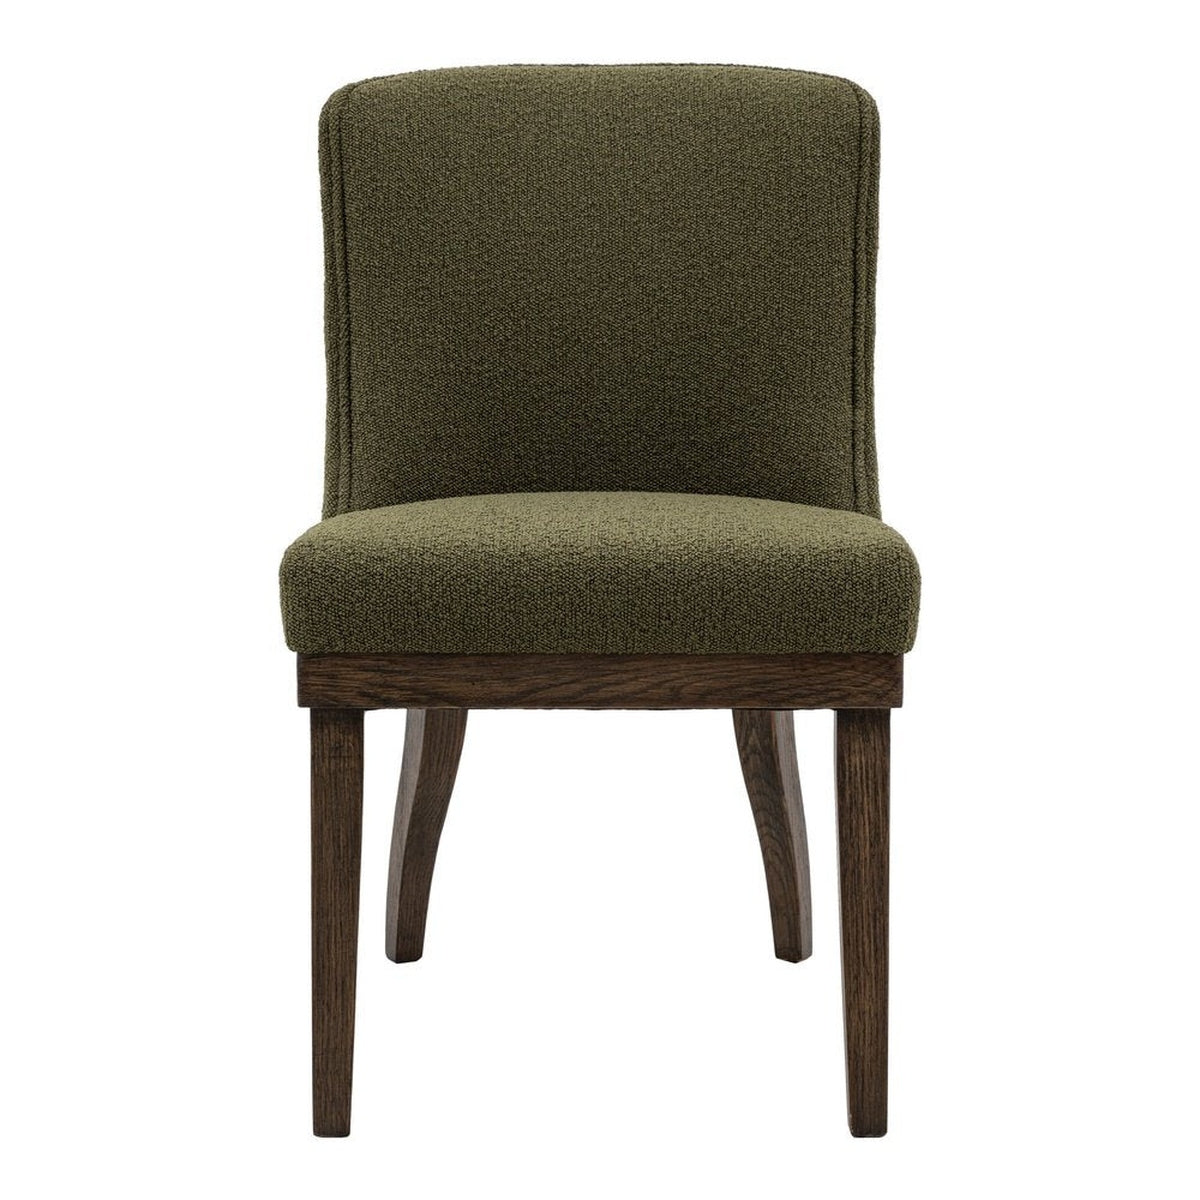 Gallery Interiors Kensington Set Of 2 Dining Chairs In Green